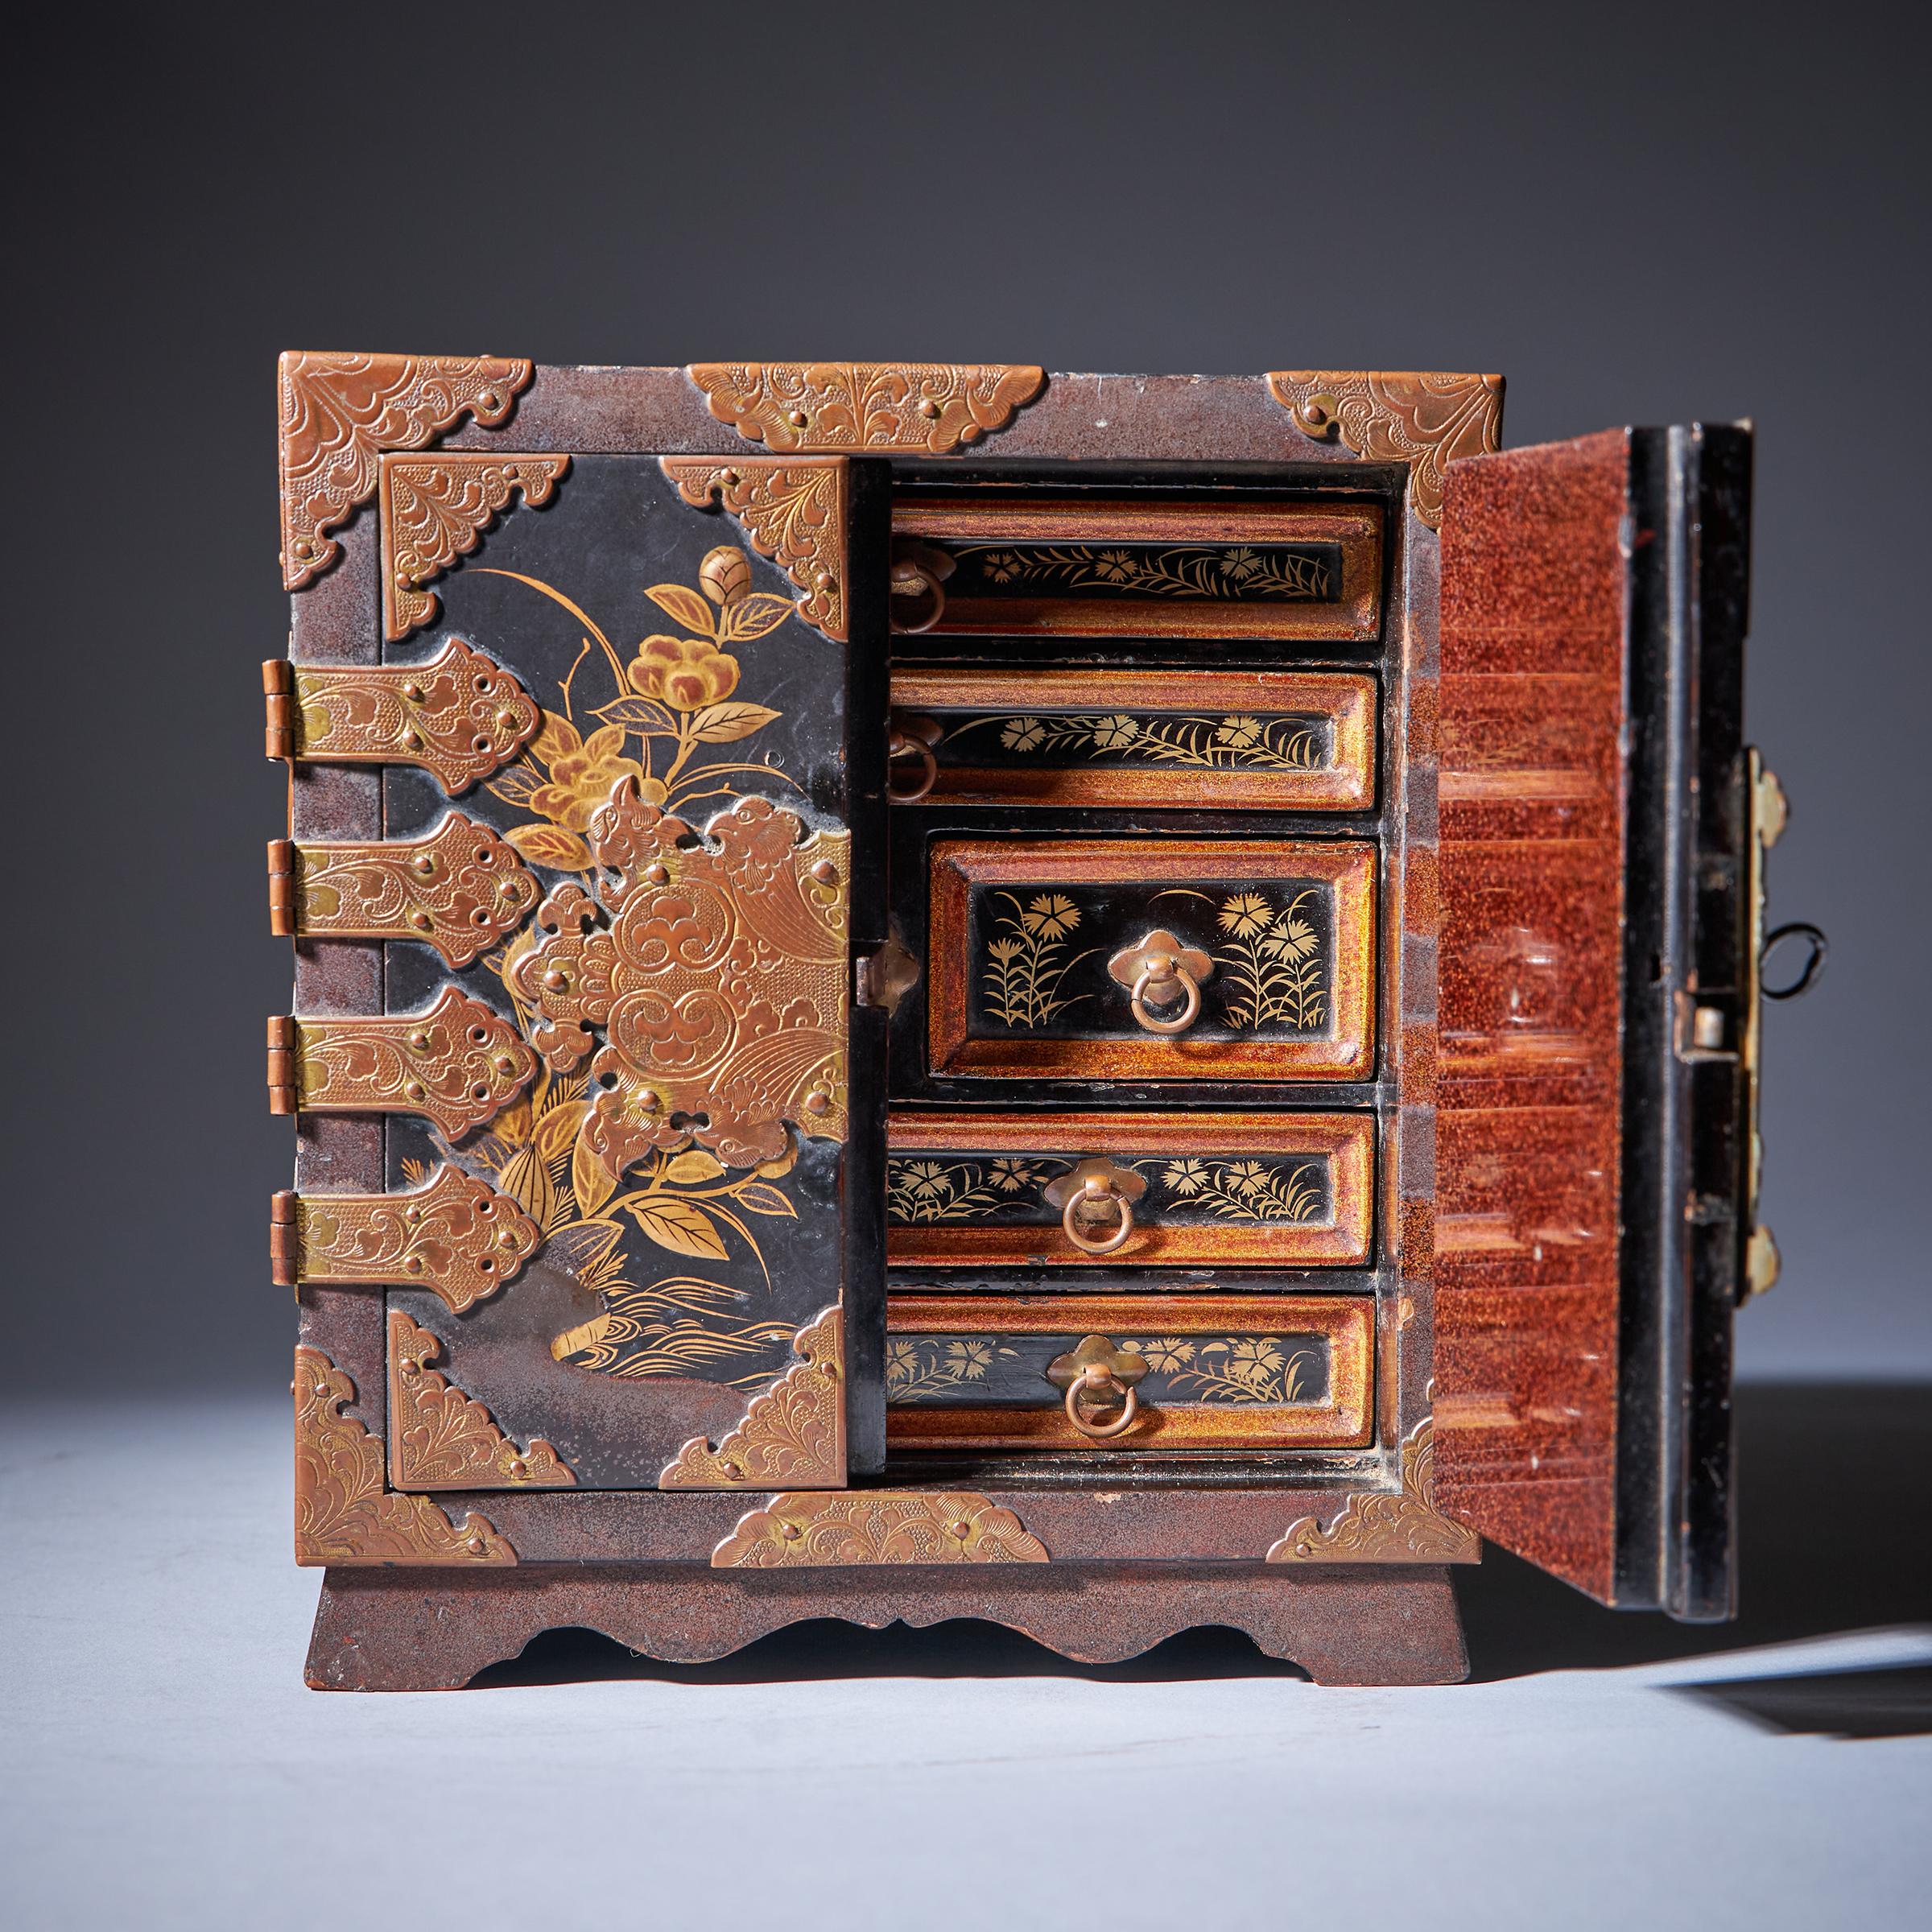 Important Early Edo Period 17th Century Miniature Japanese Lacquer Cabinet For Sale 11